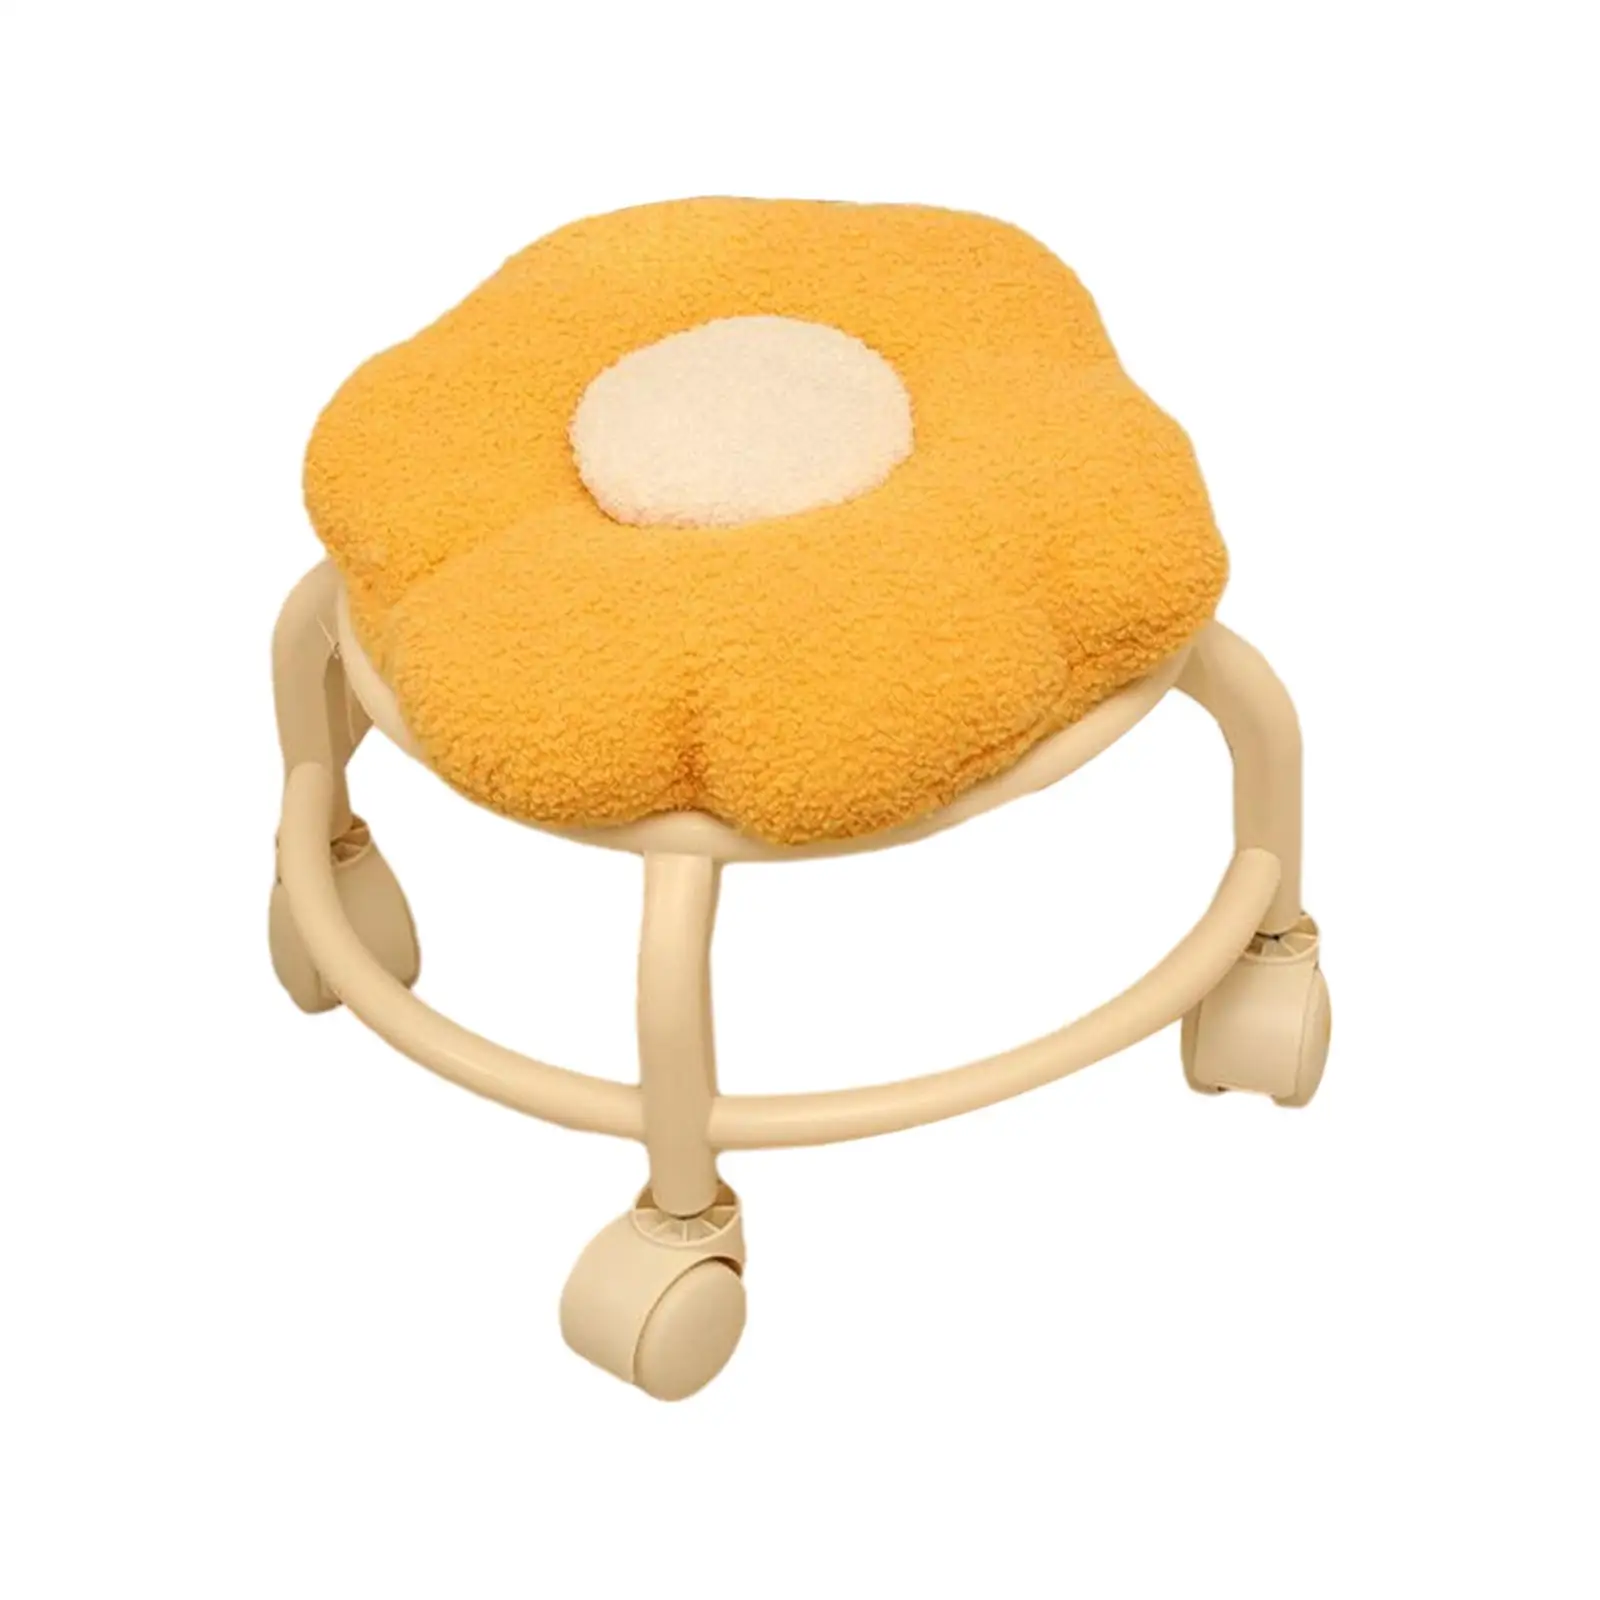 Low Rolling Stool with Wheels Flower Shape Comfortable Cute Low Small Stool Footrest for Garage Bedside Porch Kitchen Playroom